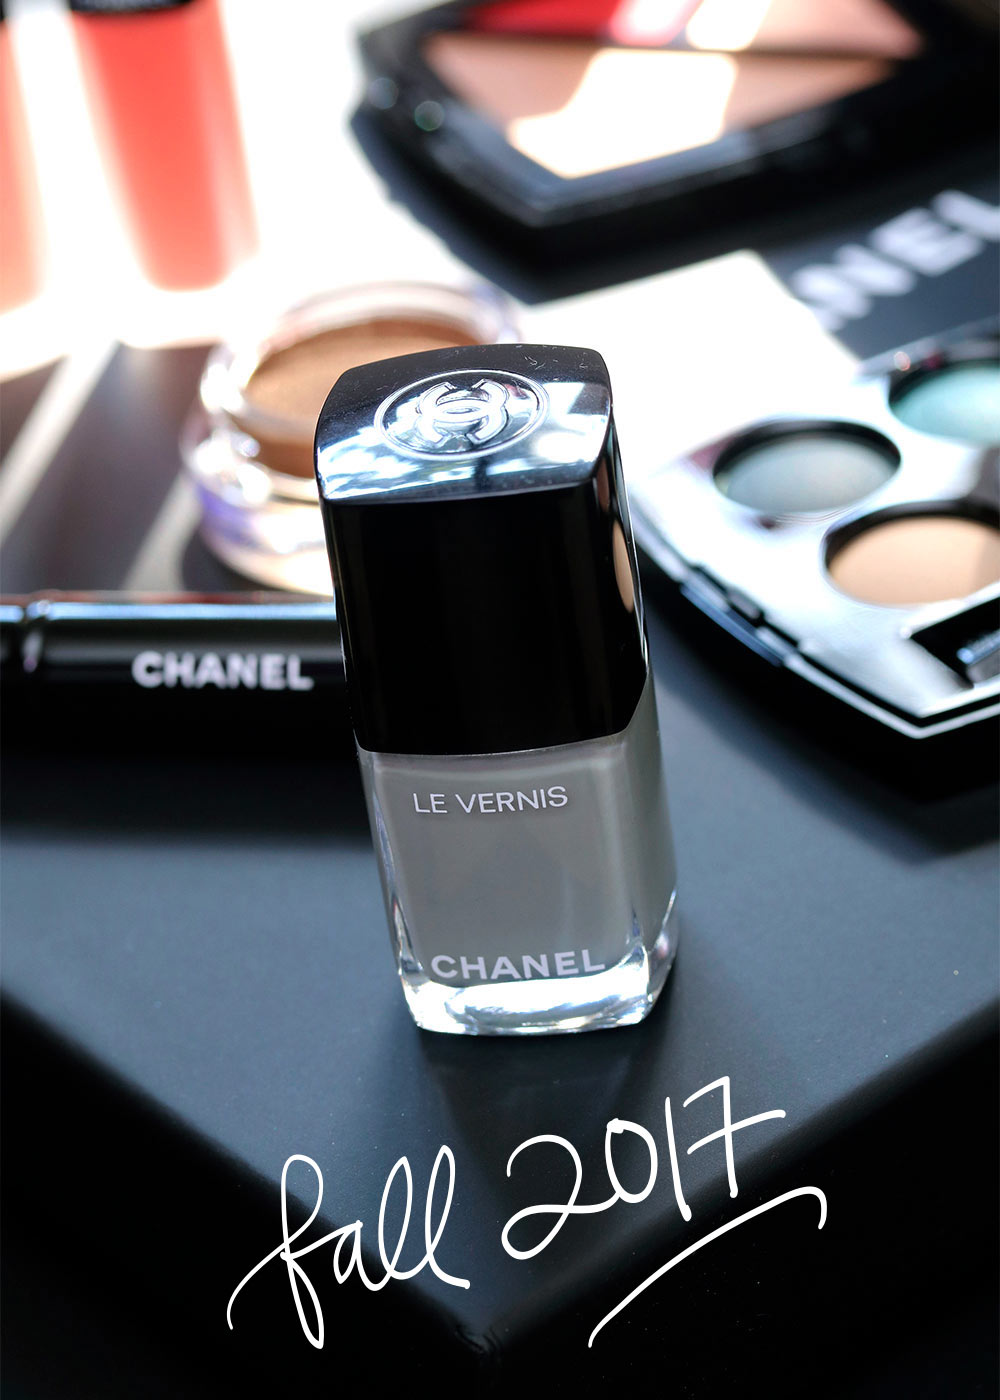 Chanel Horizon Line Le Vernis Longwear Nail Colour, Available Now in the New Diary Fall Collection - and Beauty Blog